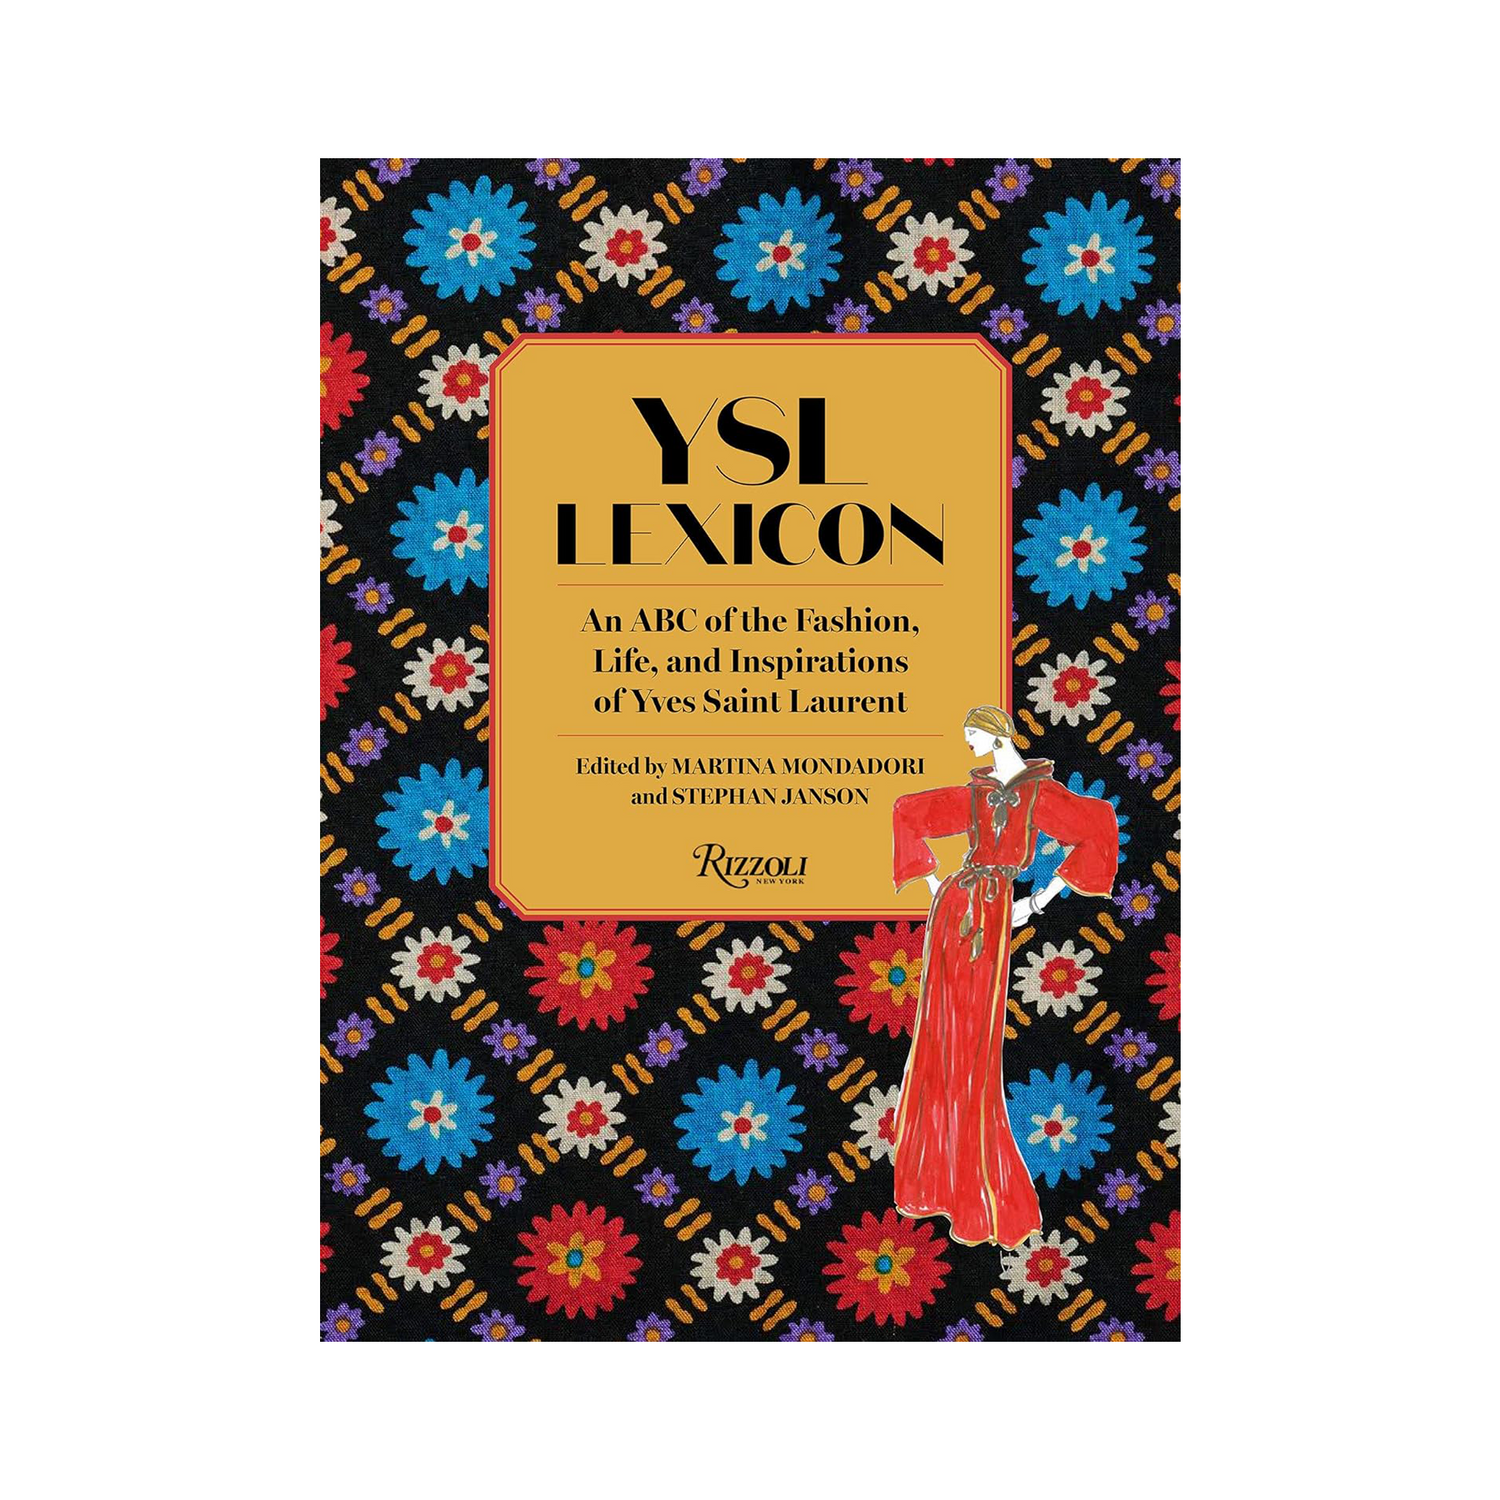 Livro Ysl Lexicon: An ABC of the Fashion, Life, and Inspirations of Yves Saint Laurent